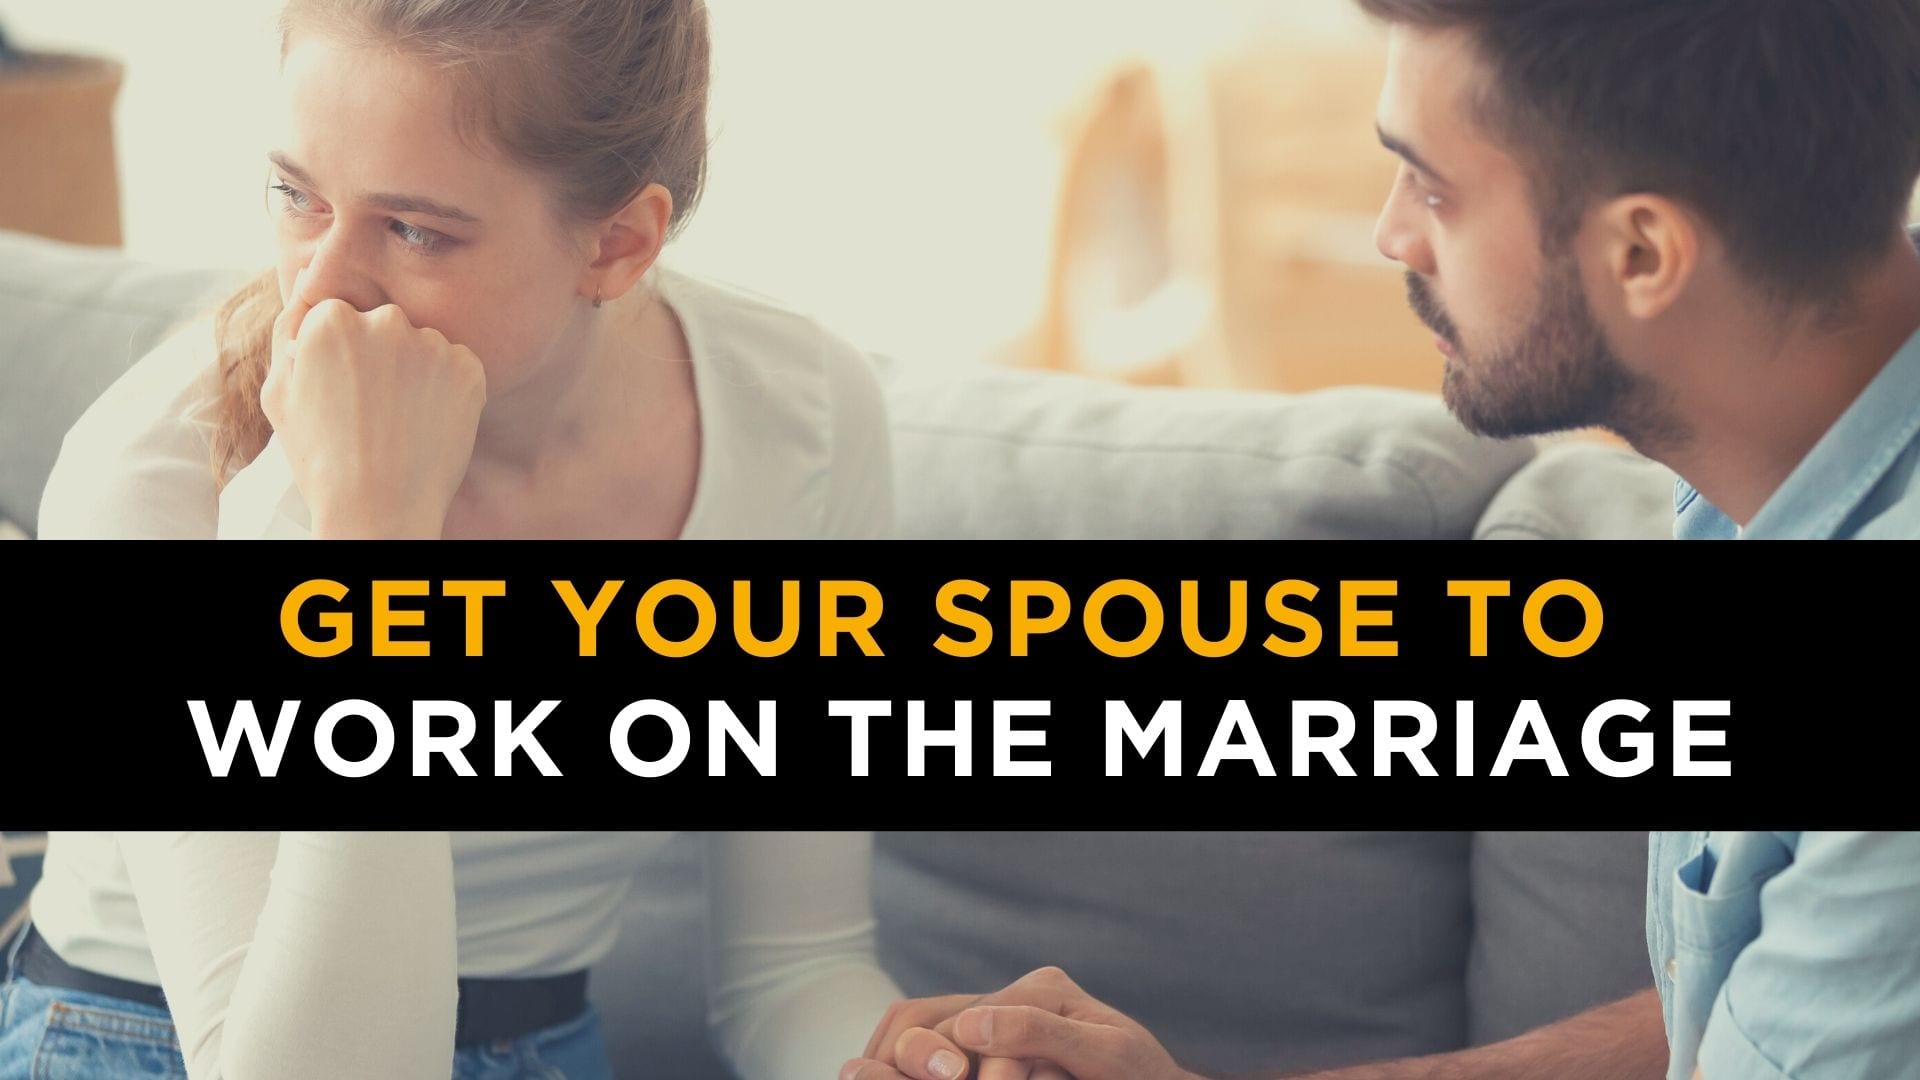 how to get spouse to work on the marriage, save my marriage, work on the marriage, spouse doesn't want to save marriage